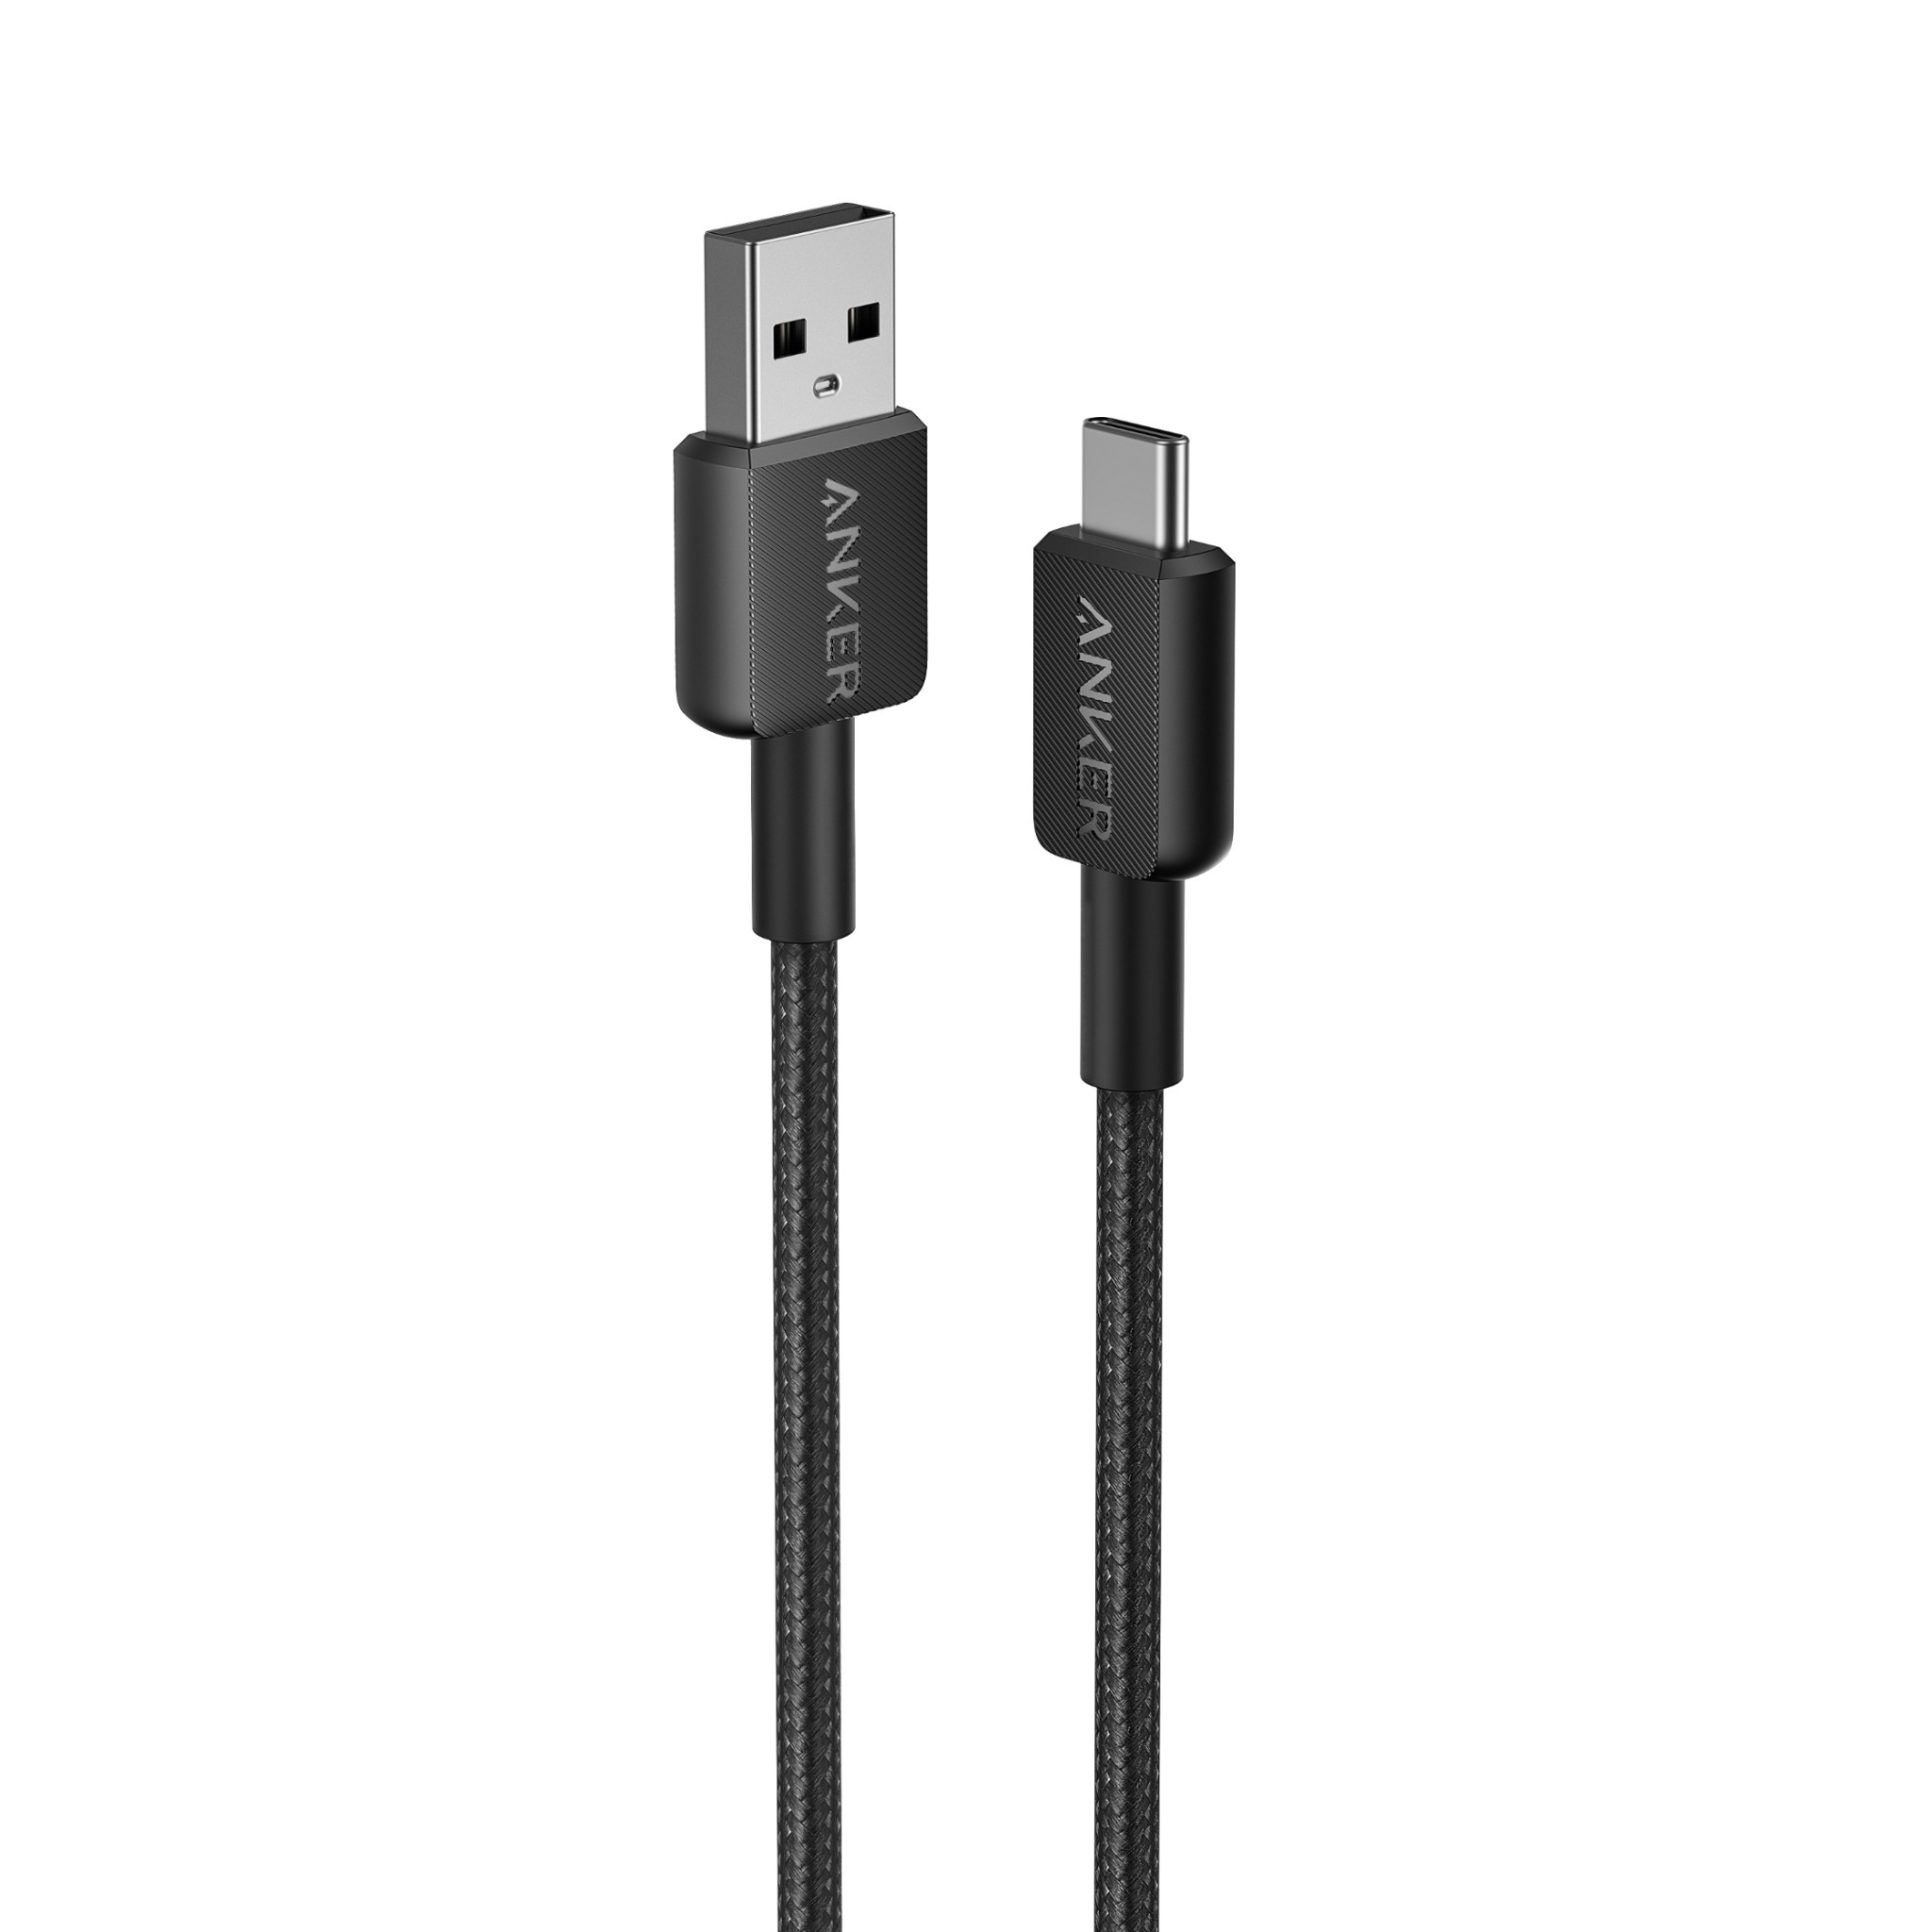 Anker 322 USB-A to USB-C Cable (3ft Braided) Black